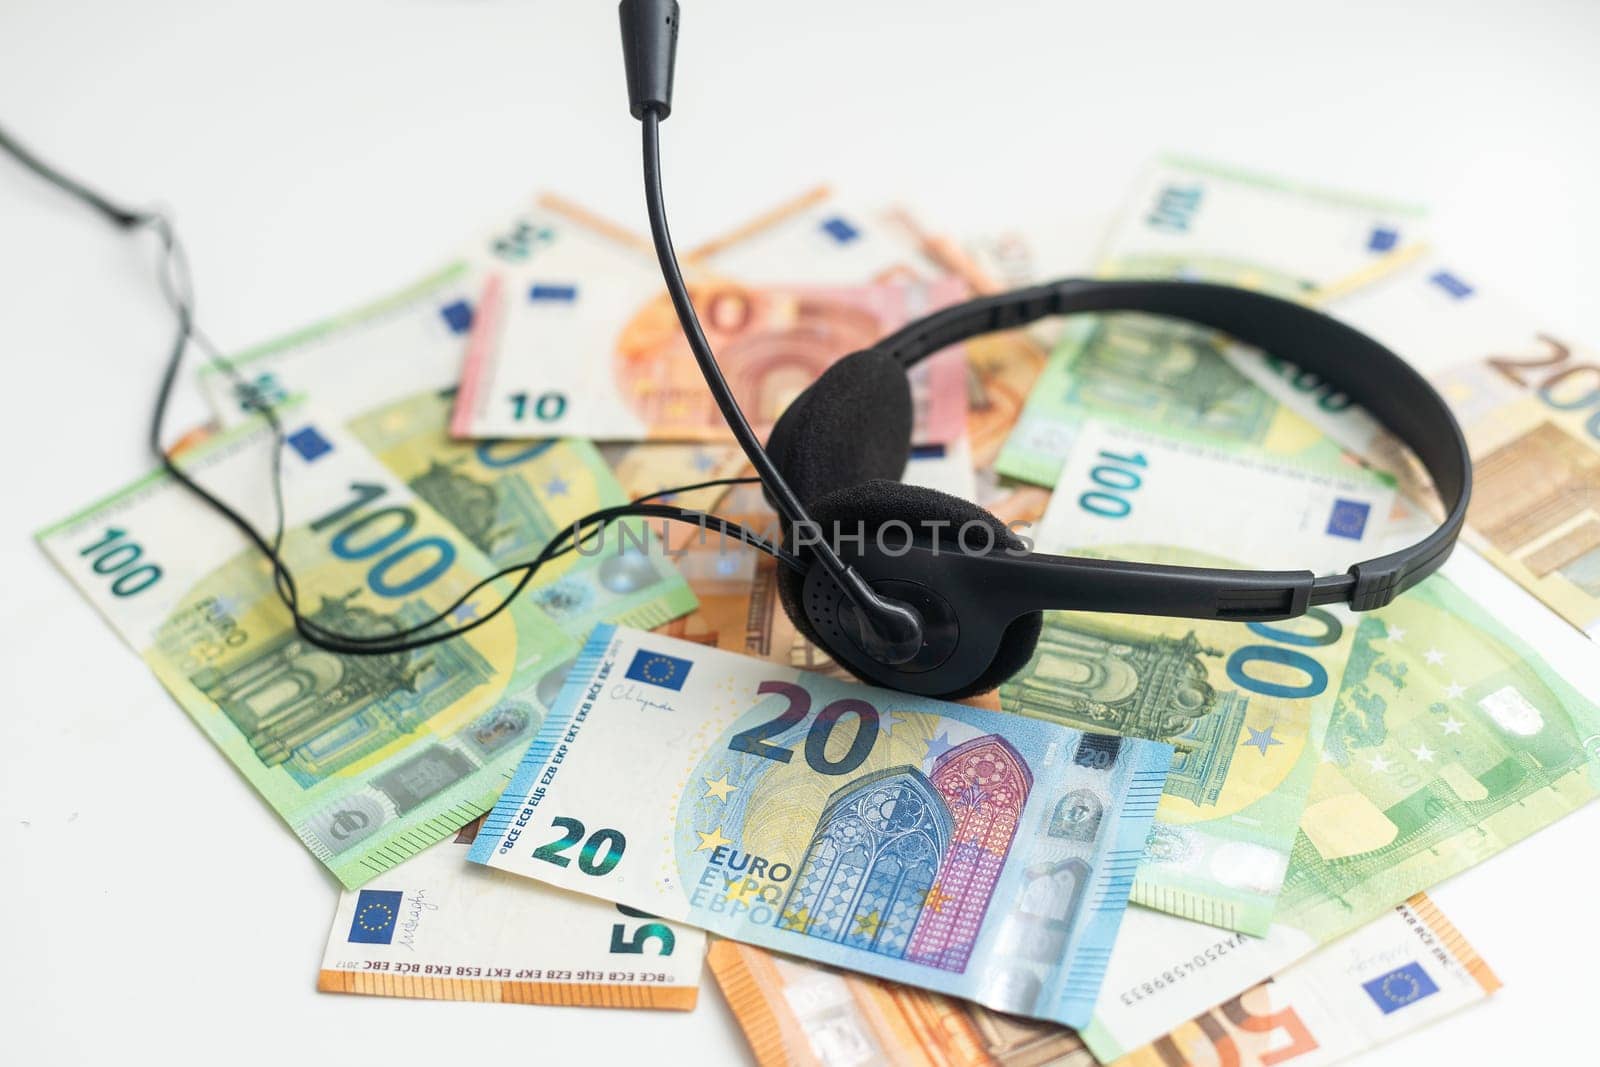 euro banknotes headphones headset. Money and technology still life concept. High quality photo